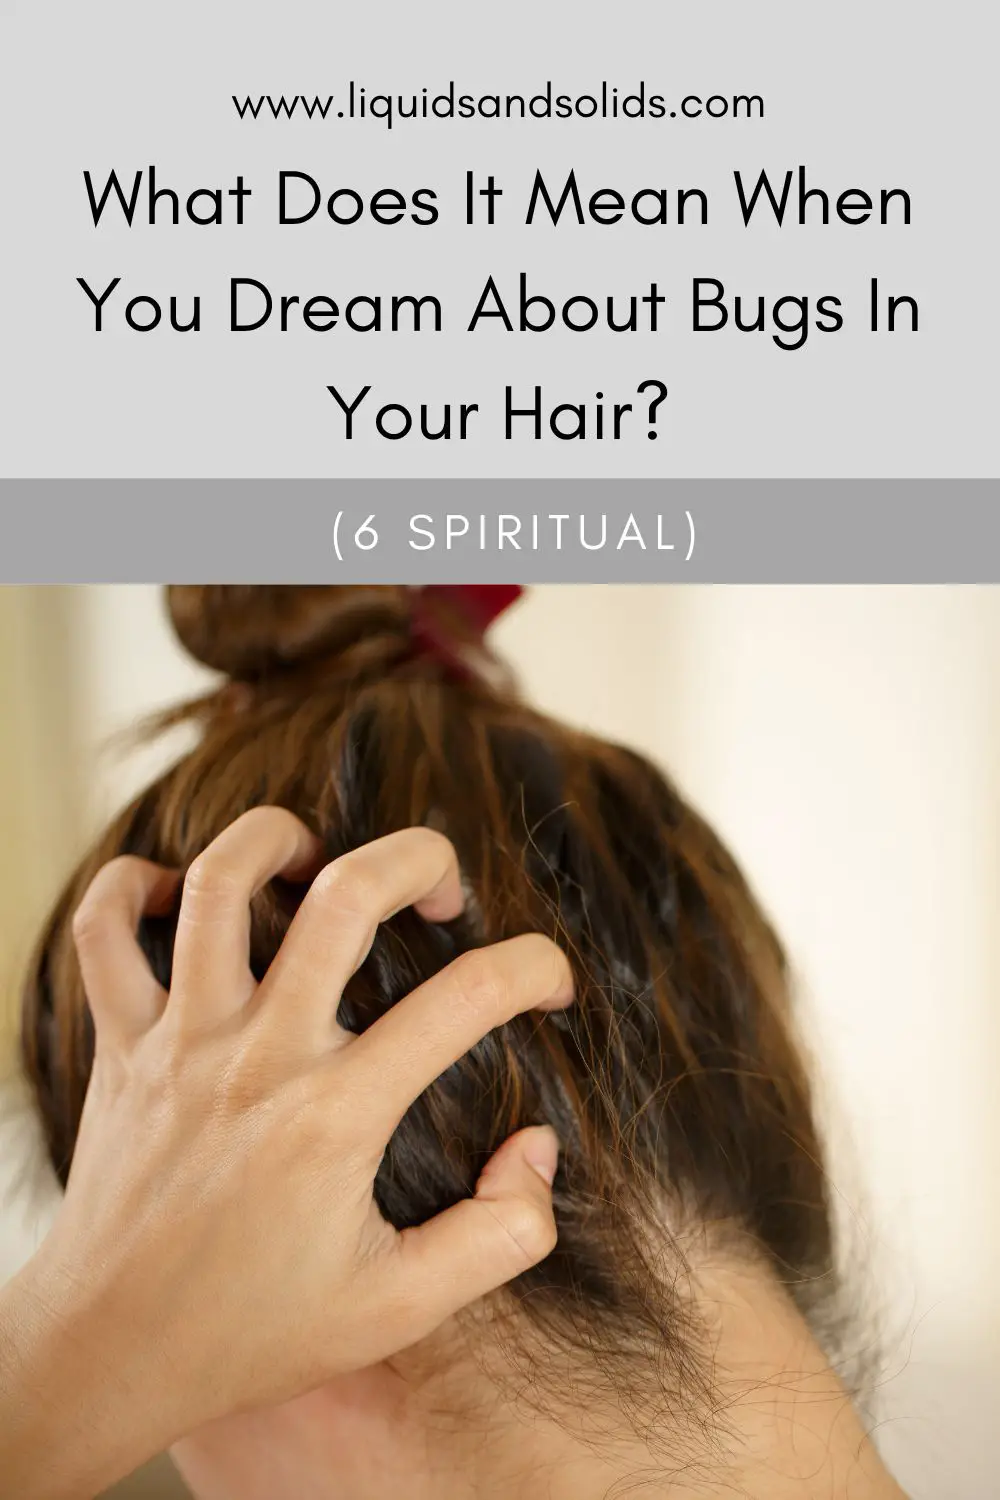 What Dreams Of Bugs In Hair Symbolize